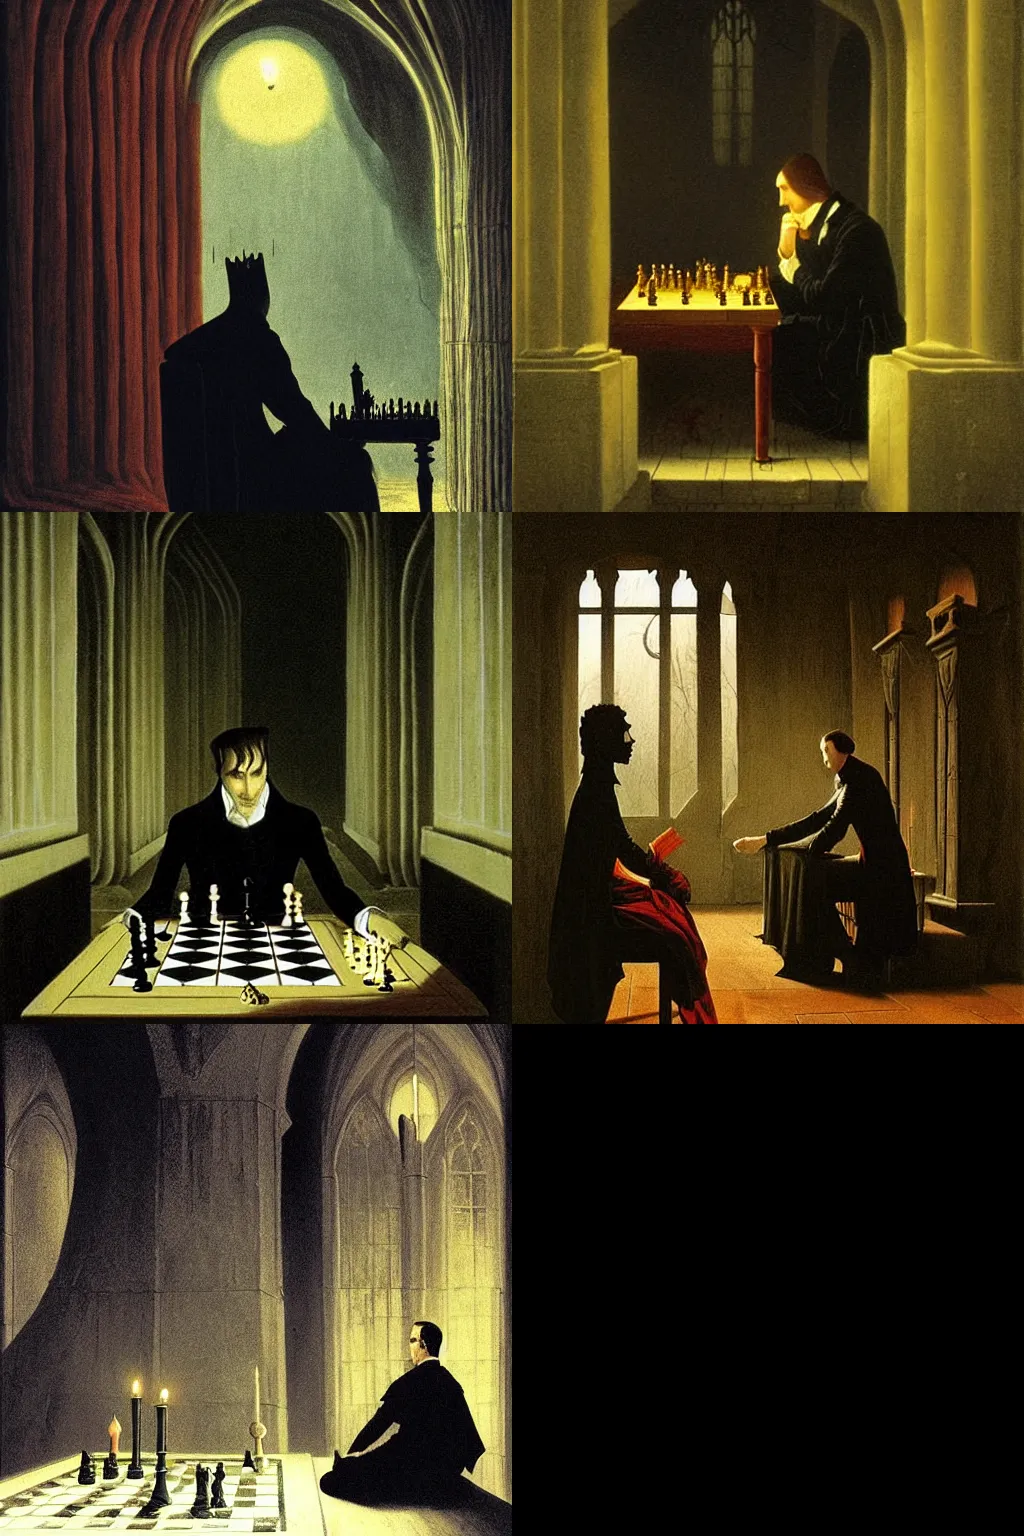 I got Banned by Gotham Chess Art Print for Sale by patodonnell125